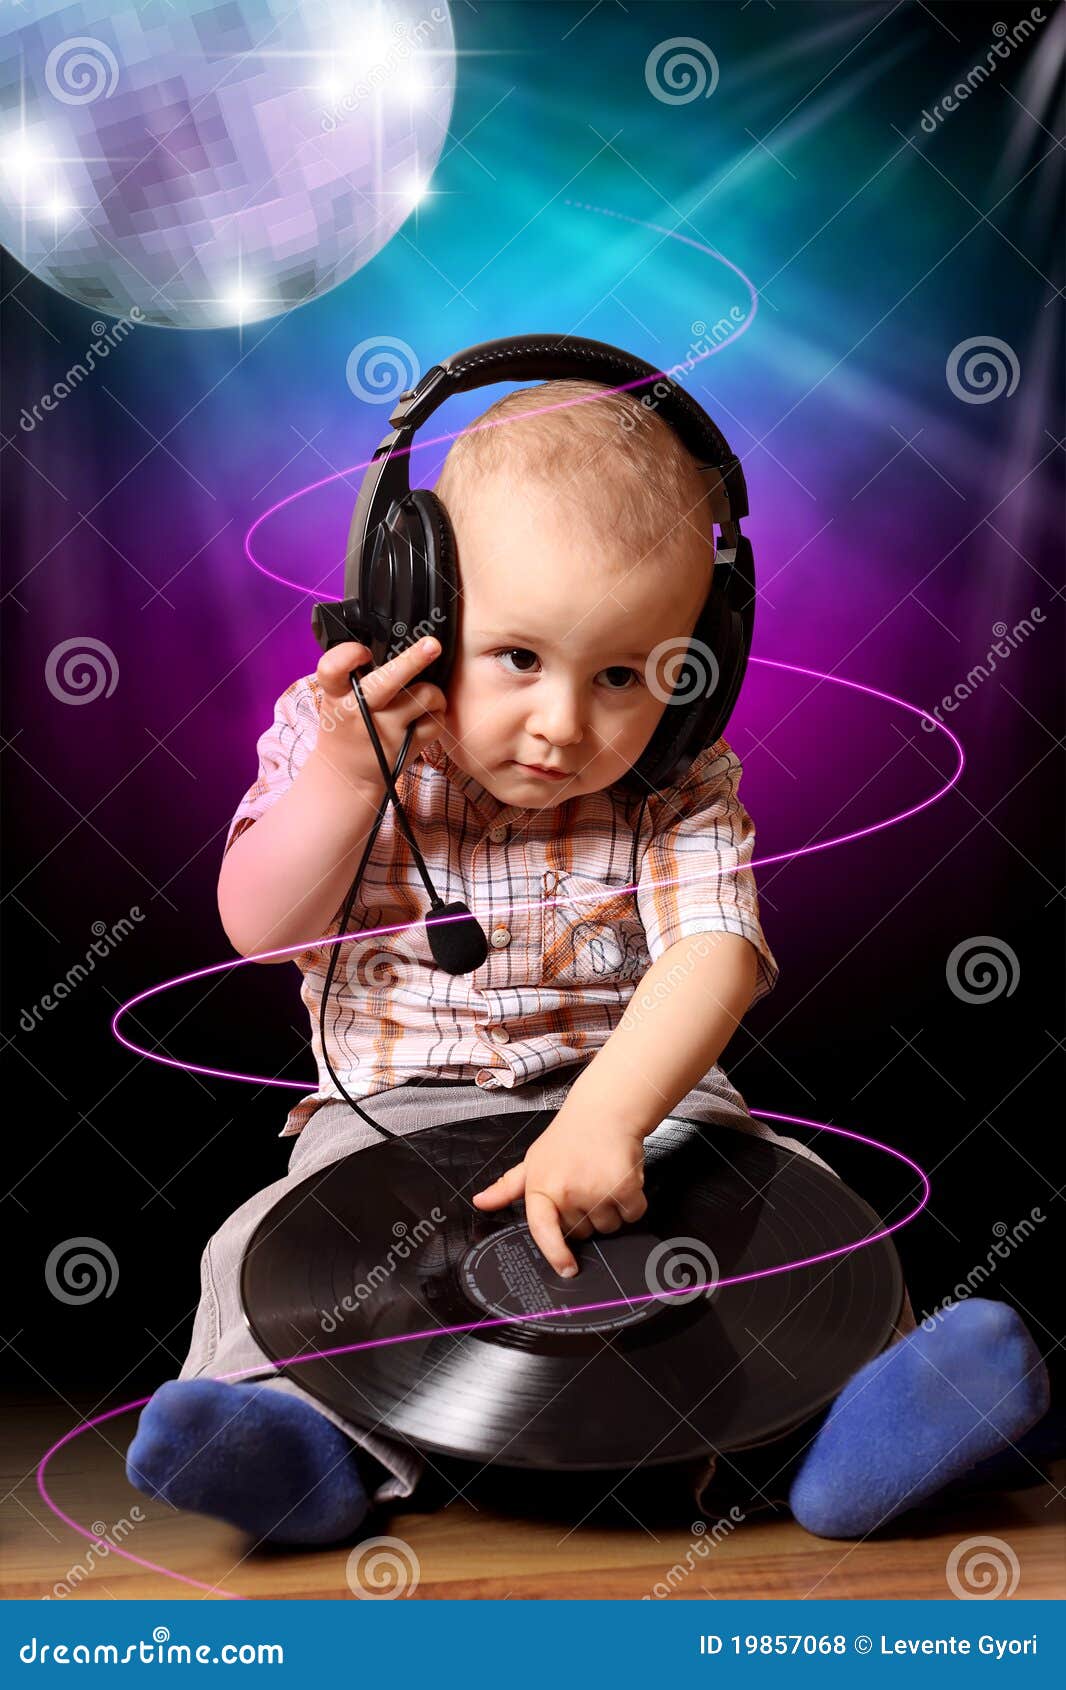 Cute Child Baby Dj in Disco Stock Photo - Image of colorful, headphones:  19857068